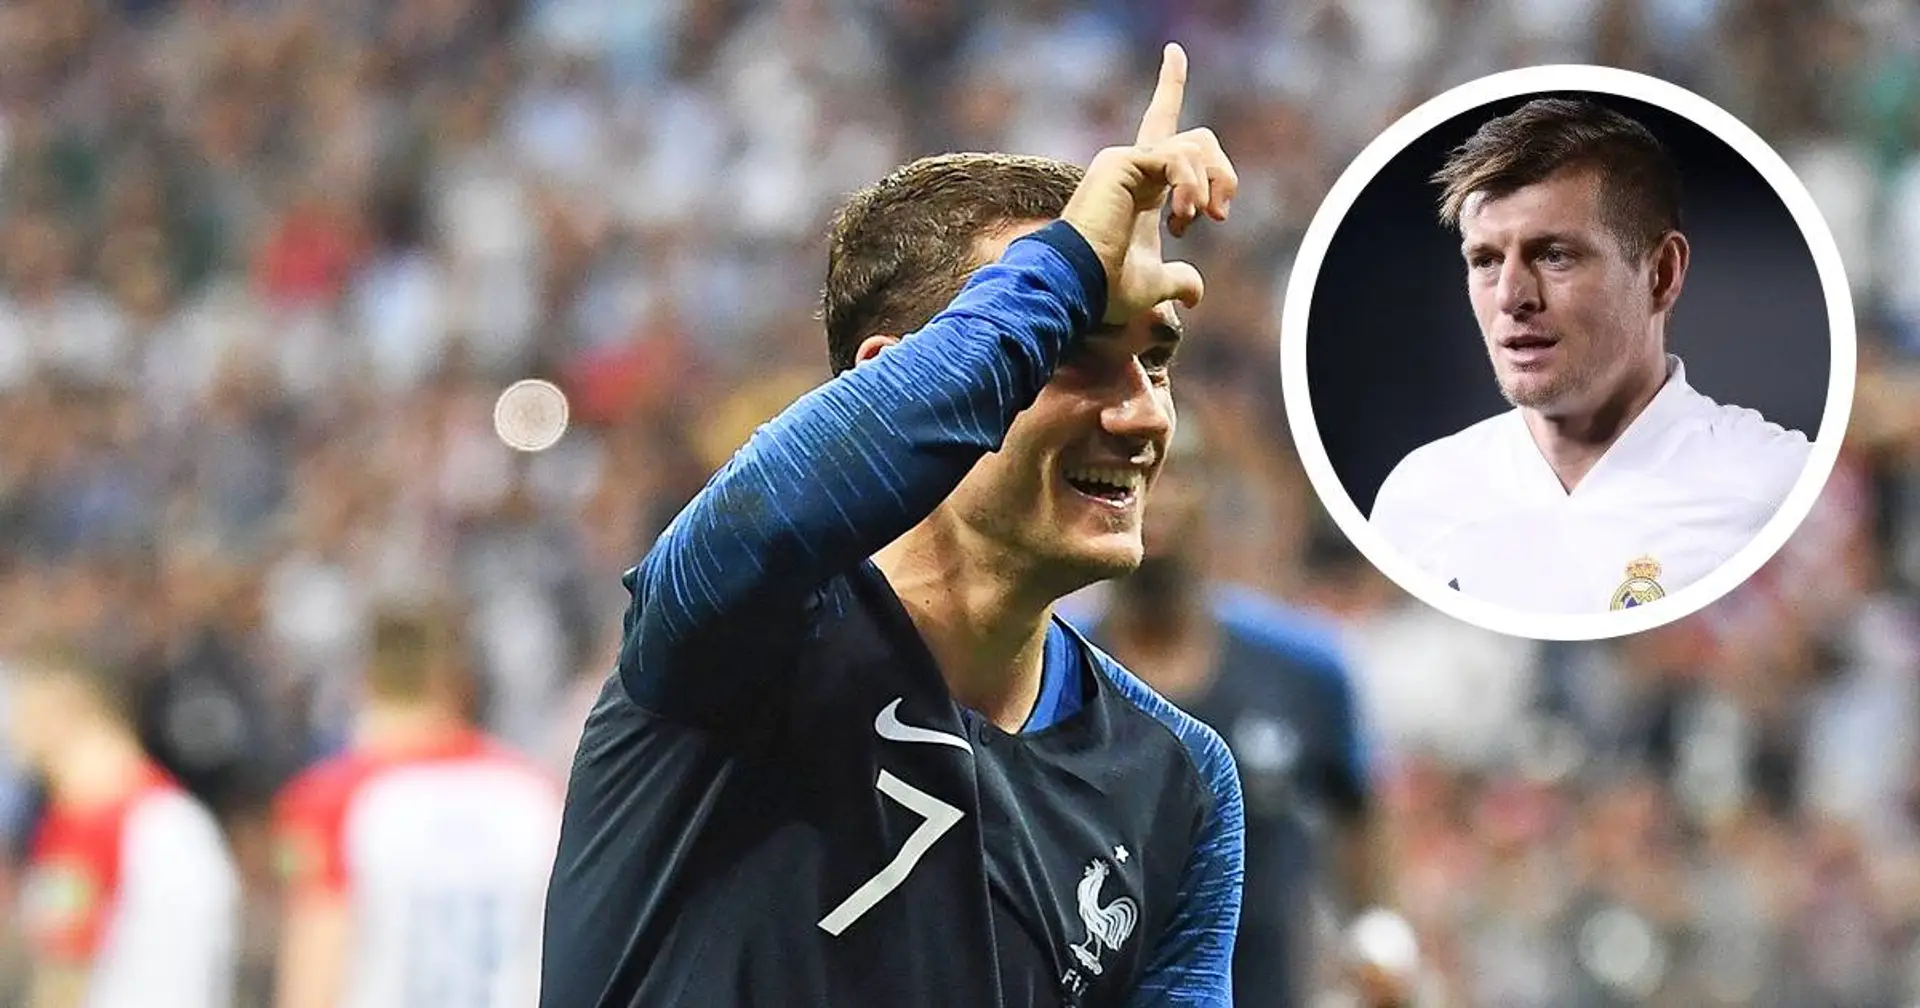 'What nonsense': Toni Kroos slams Antoine Griezmann for his 'silly' goal celebrations